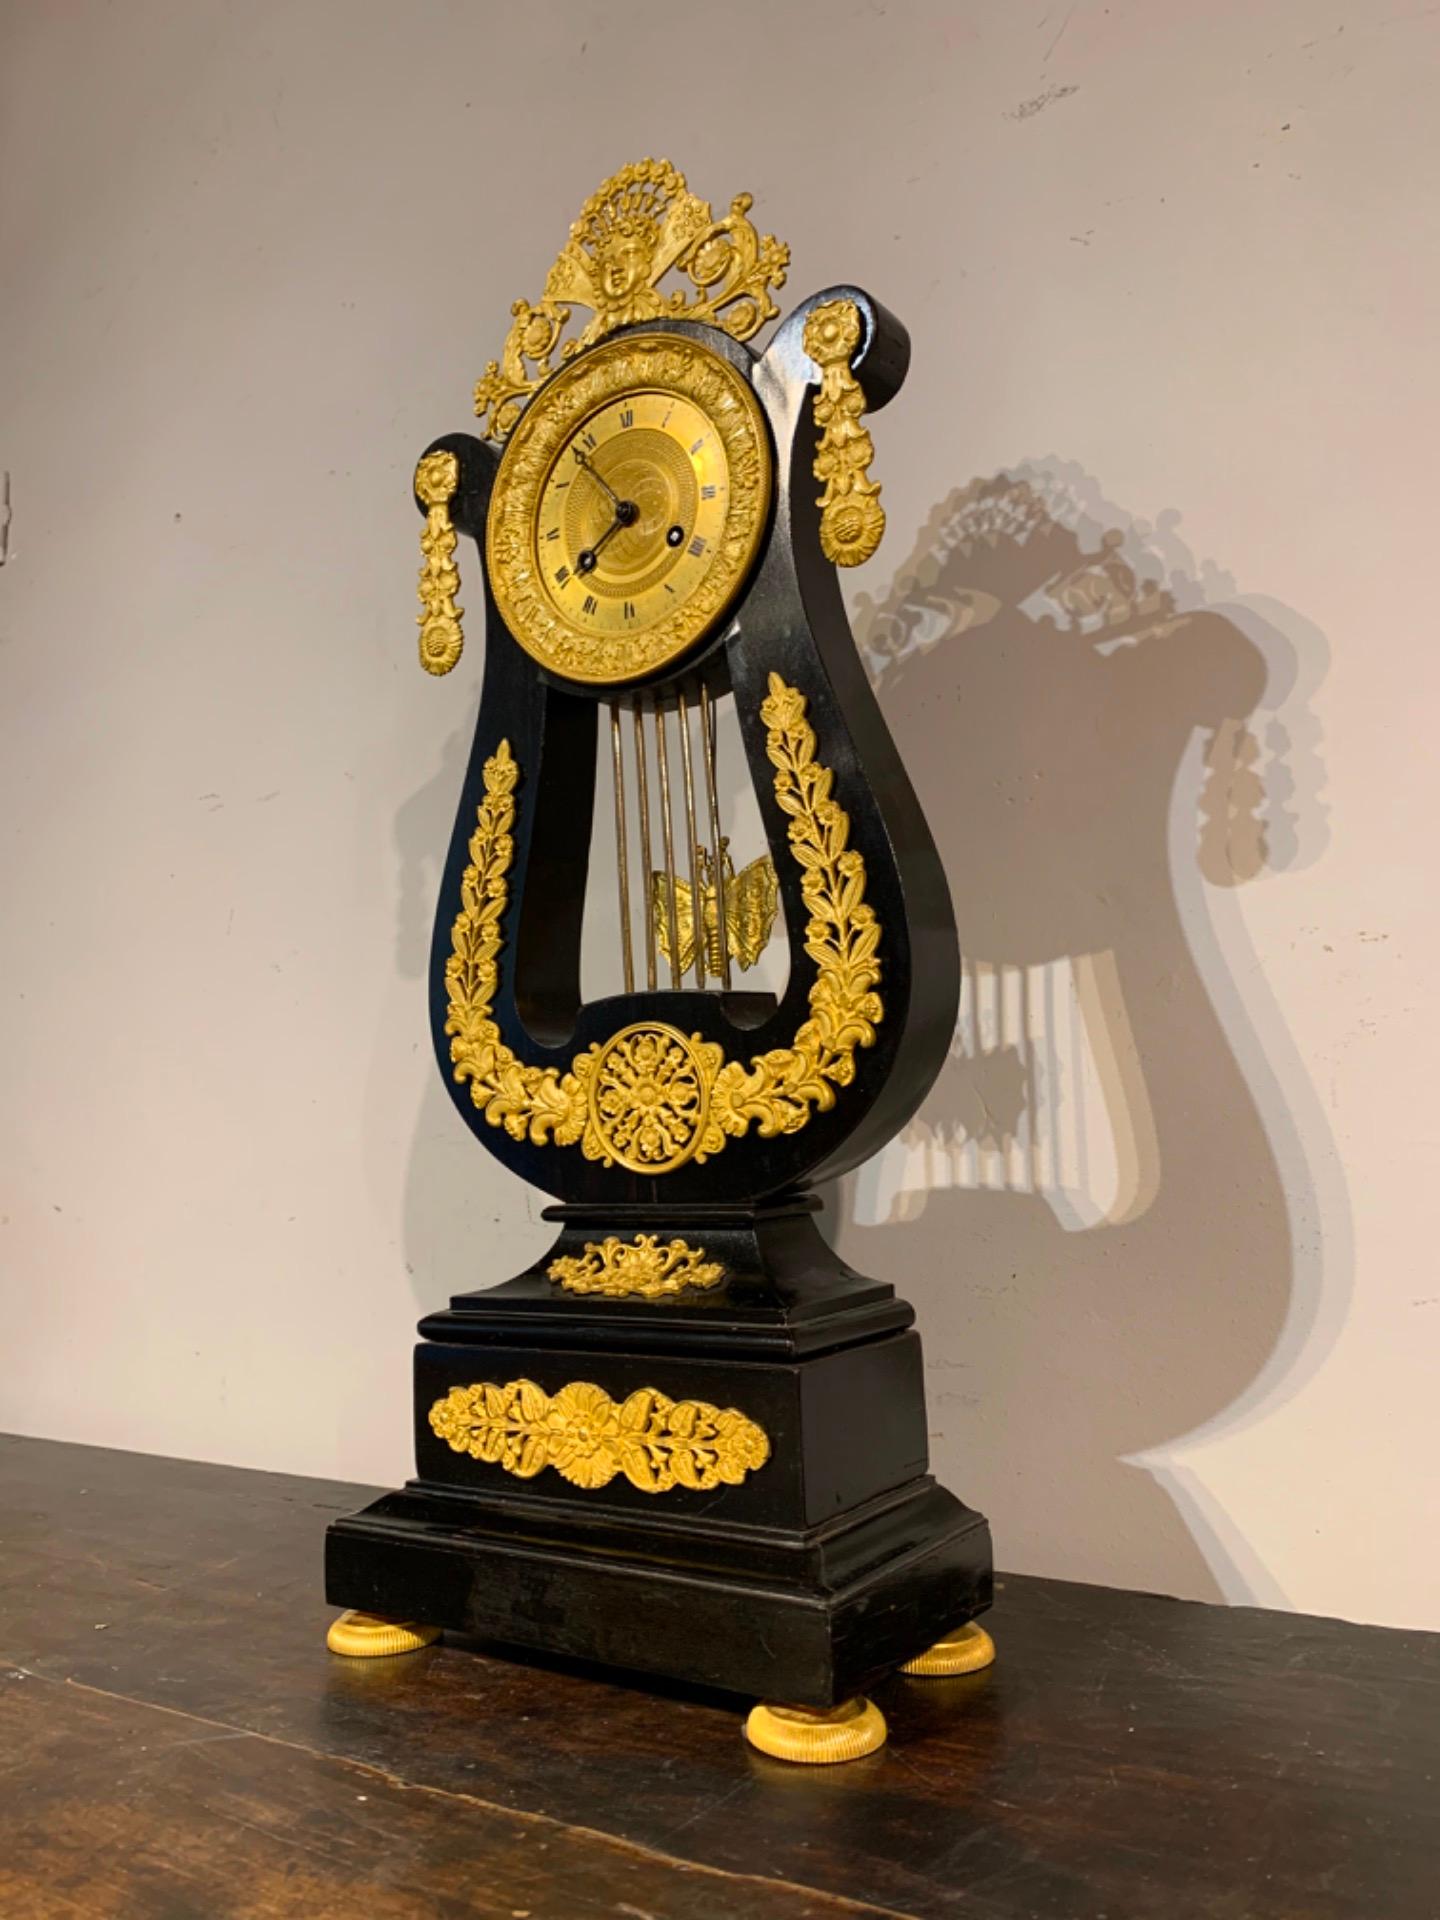 Beautiful Parisian table clock in the shape of a lyre in ebonized wood with gilt bronze applications.
Silk thread suspension, weekly winding, strikes the hours and half hours. The butterfly pendulum is also refined.
Typical French manufacture from